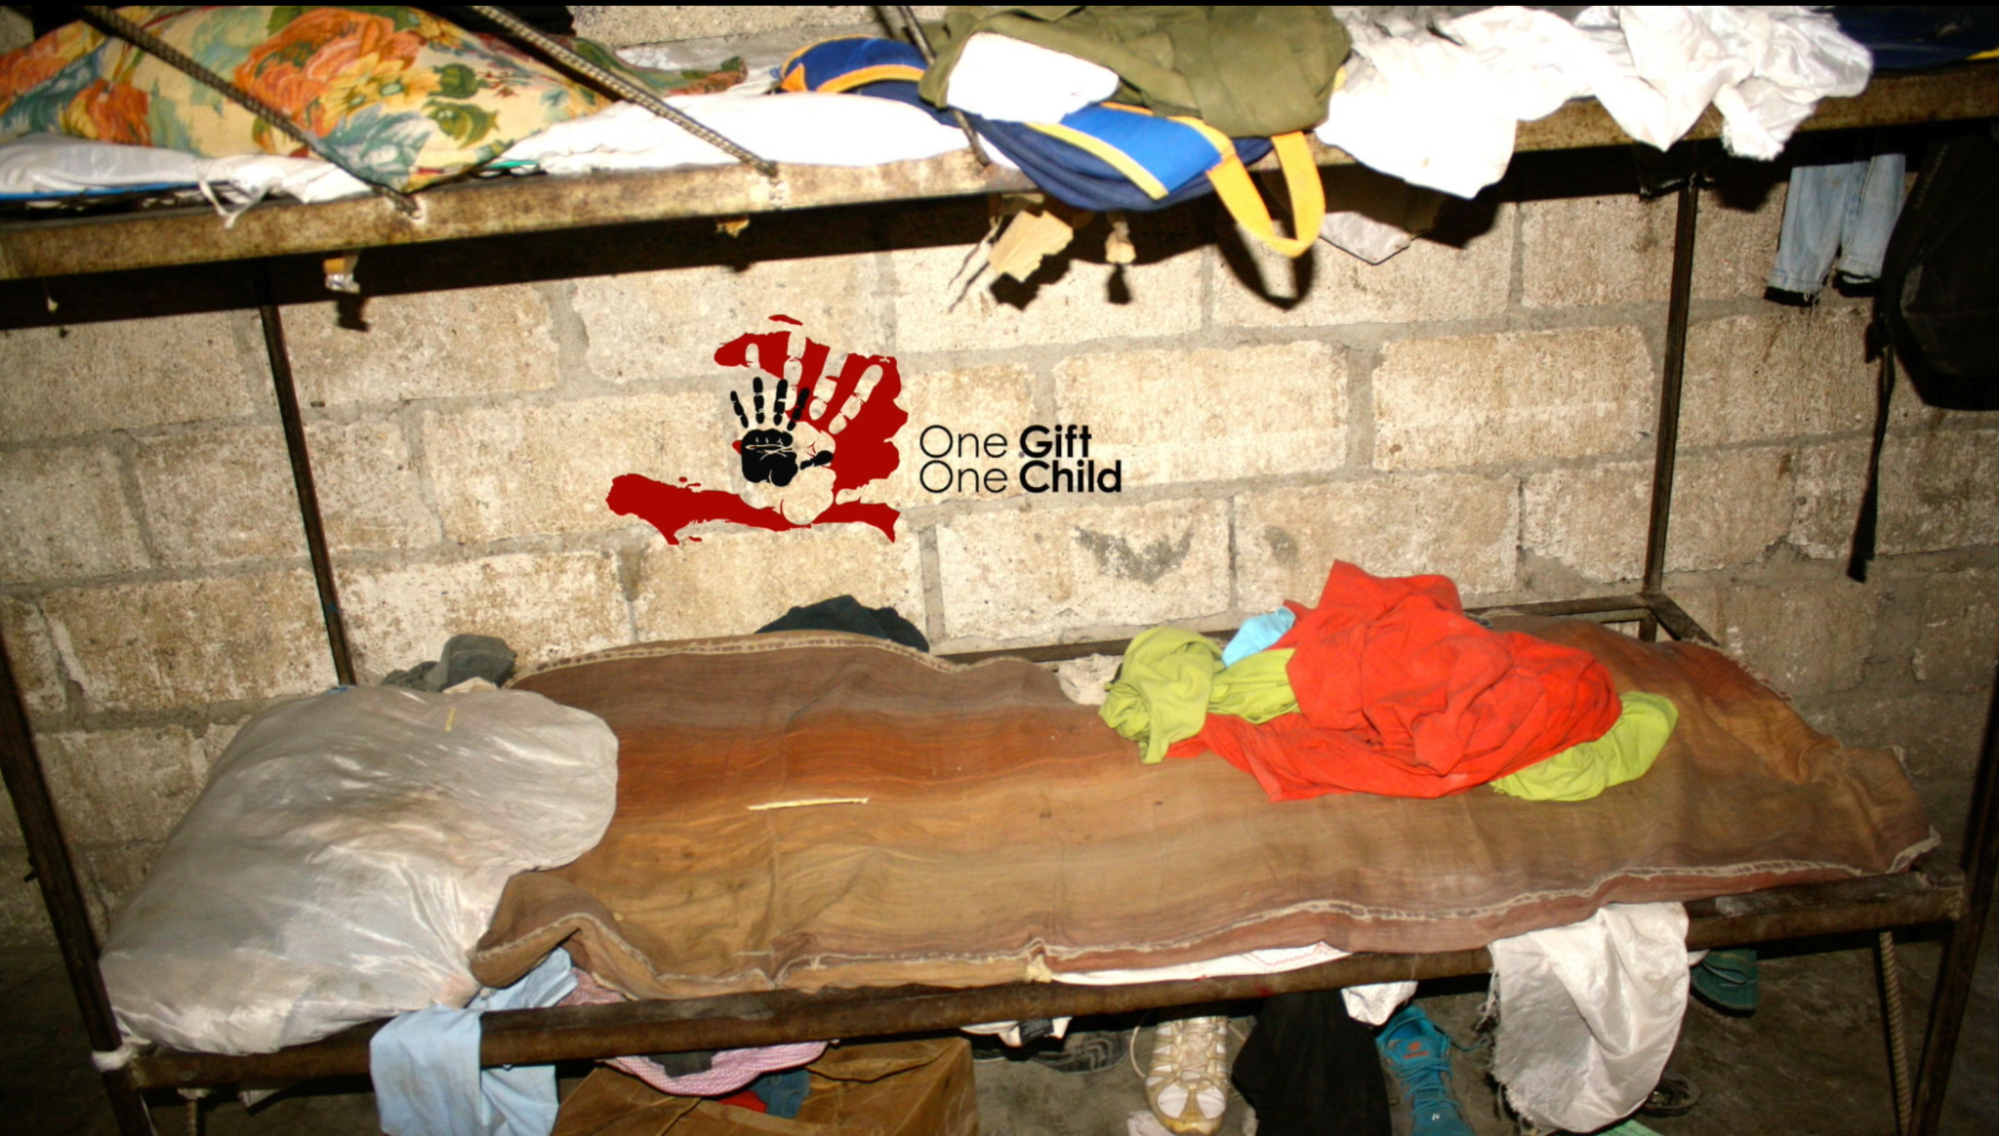 Figure 1: A “bed” in an abusive orphanage.